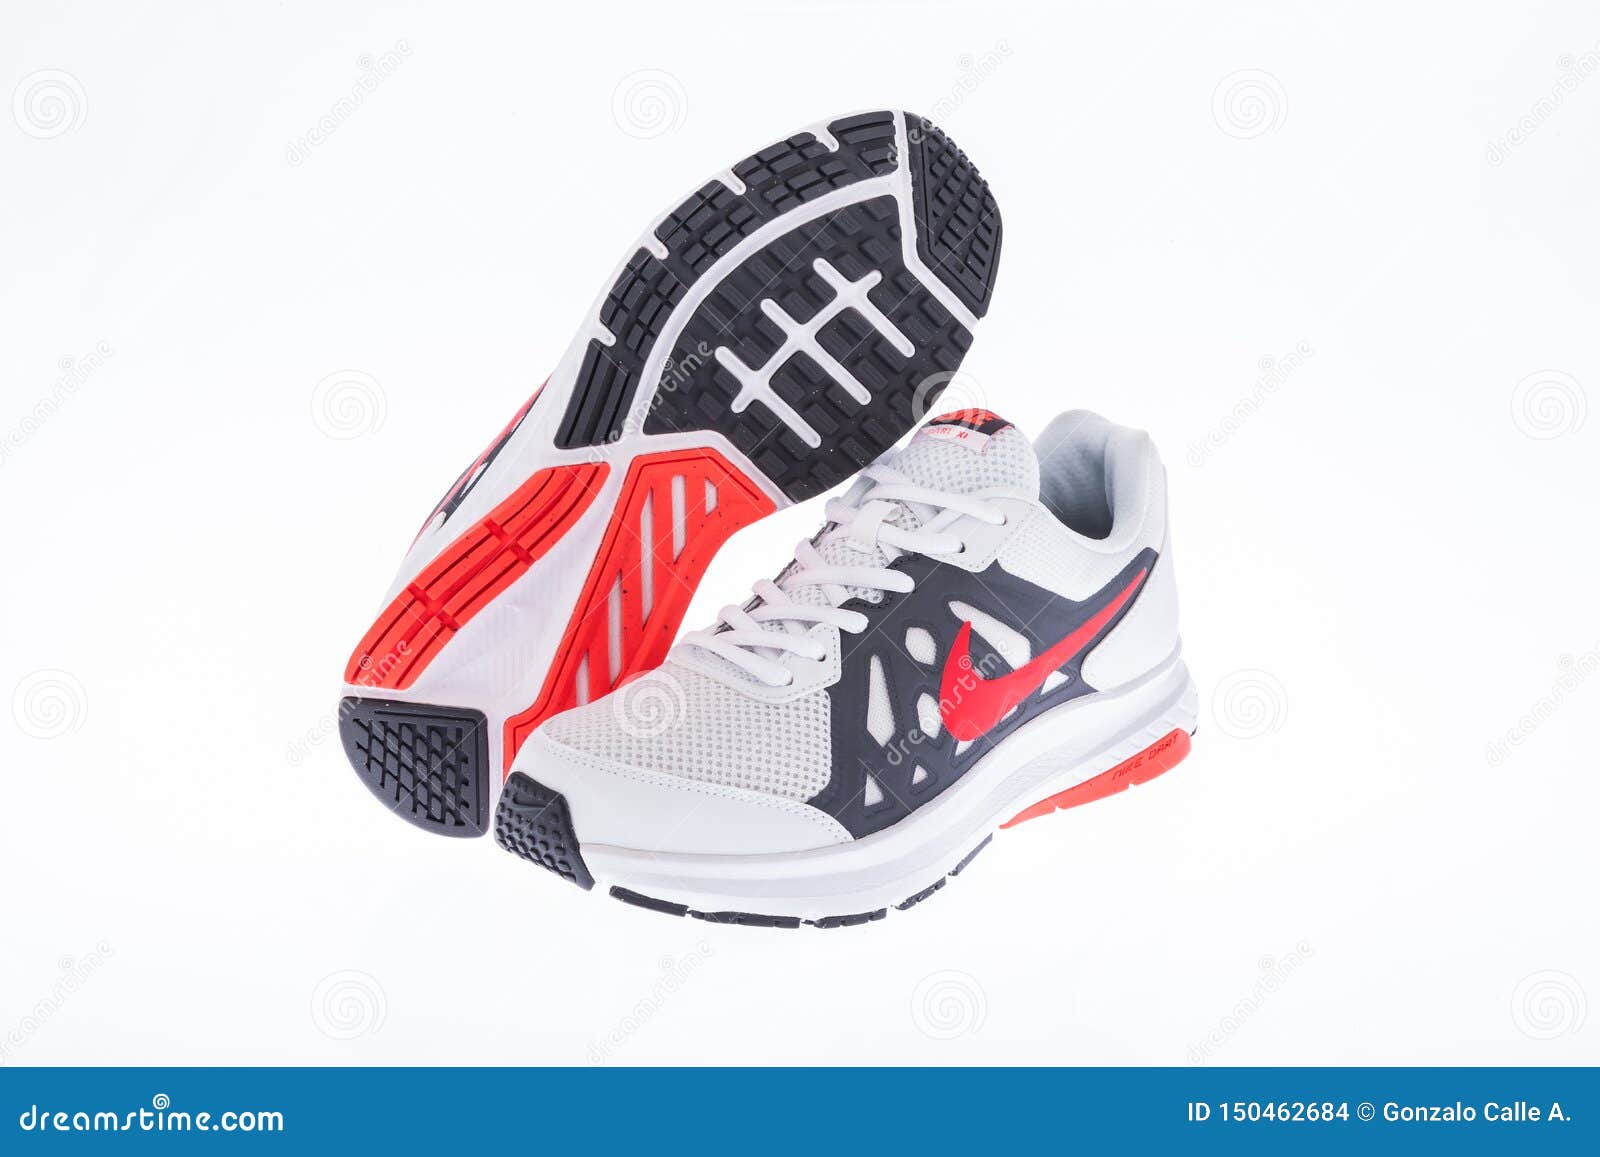 Medellin, Colombia - June 13, 2019: Sport Shoes Photo on White Background Editorial Stock Image - Image of illustrative, product: 150462684